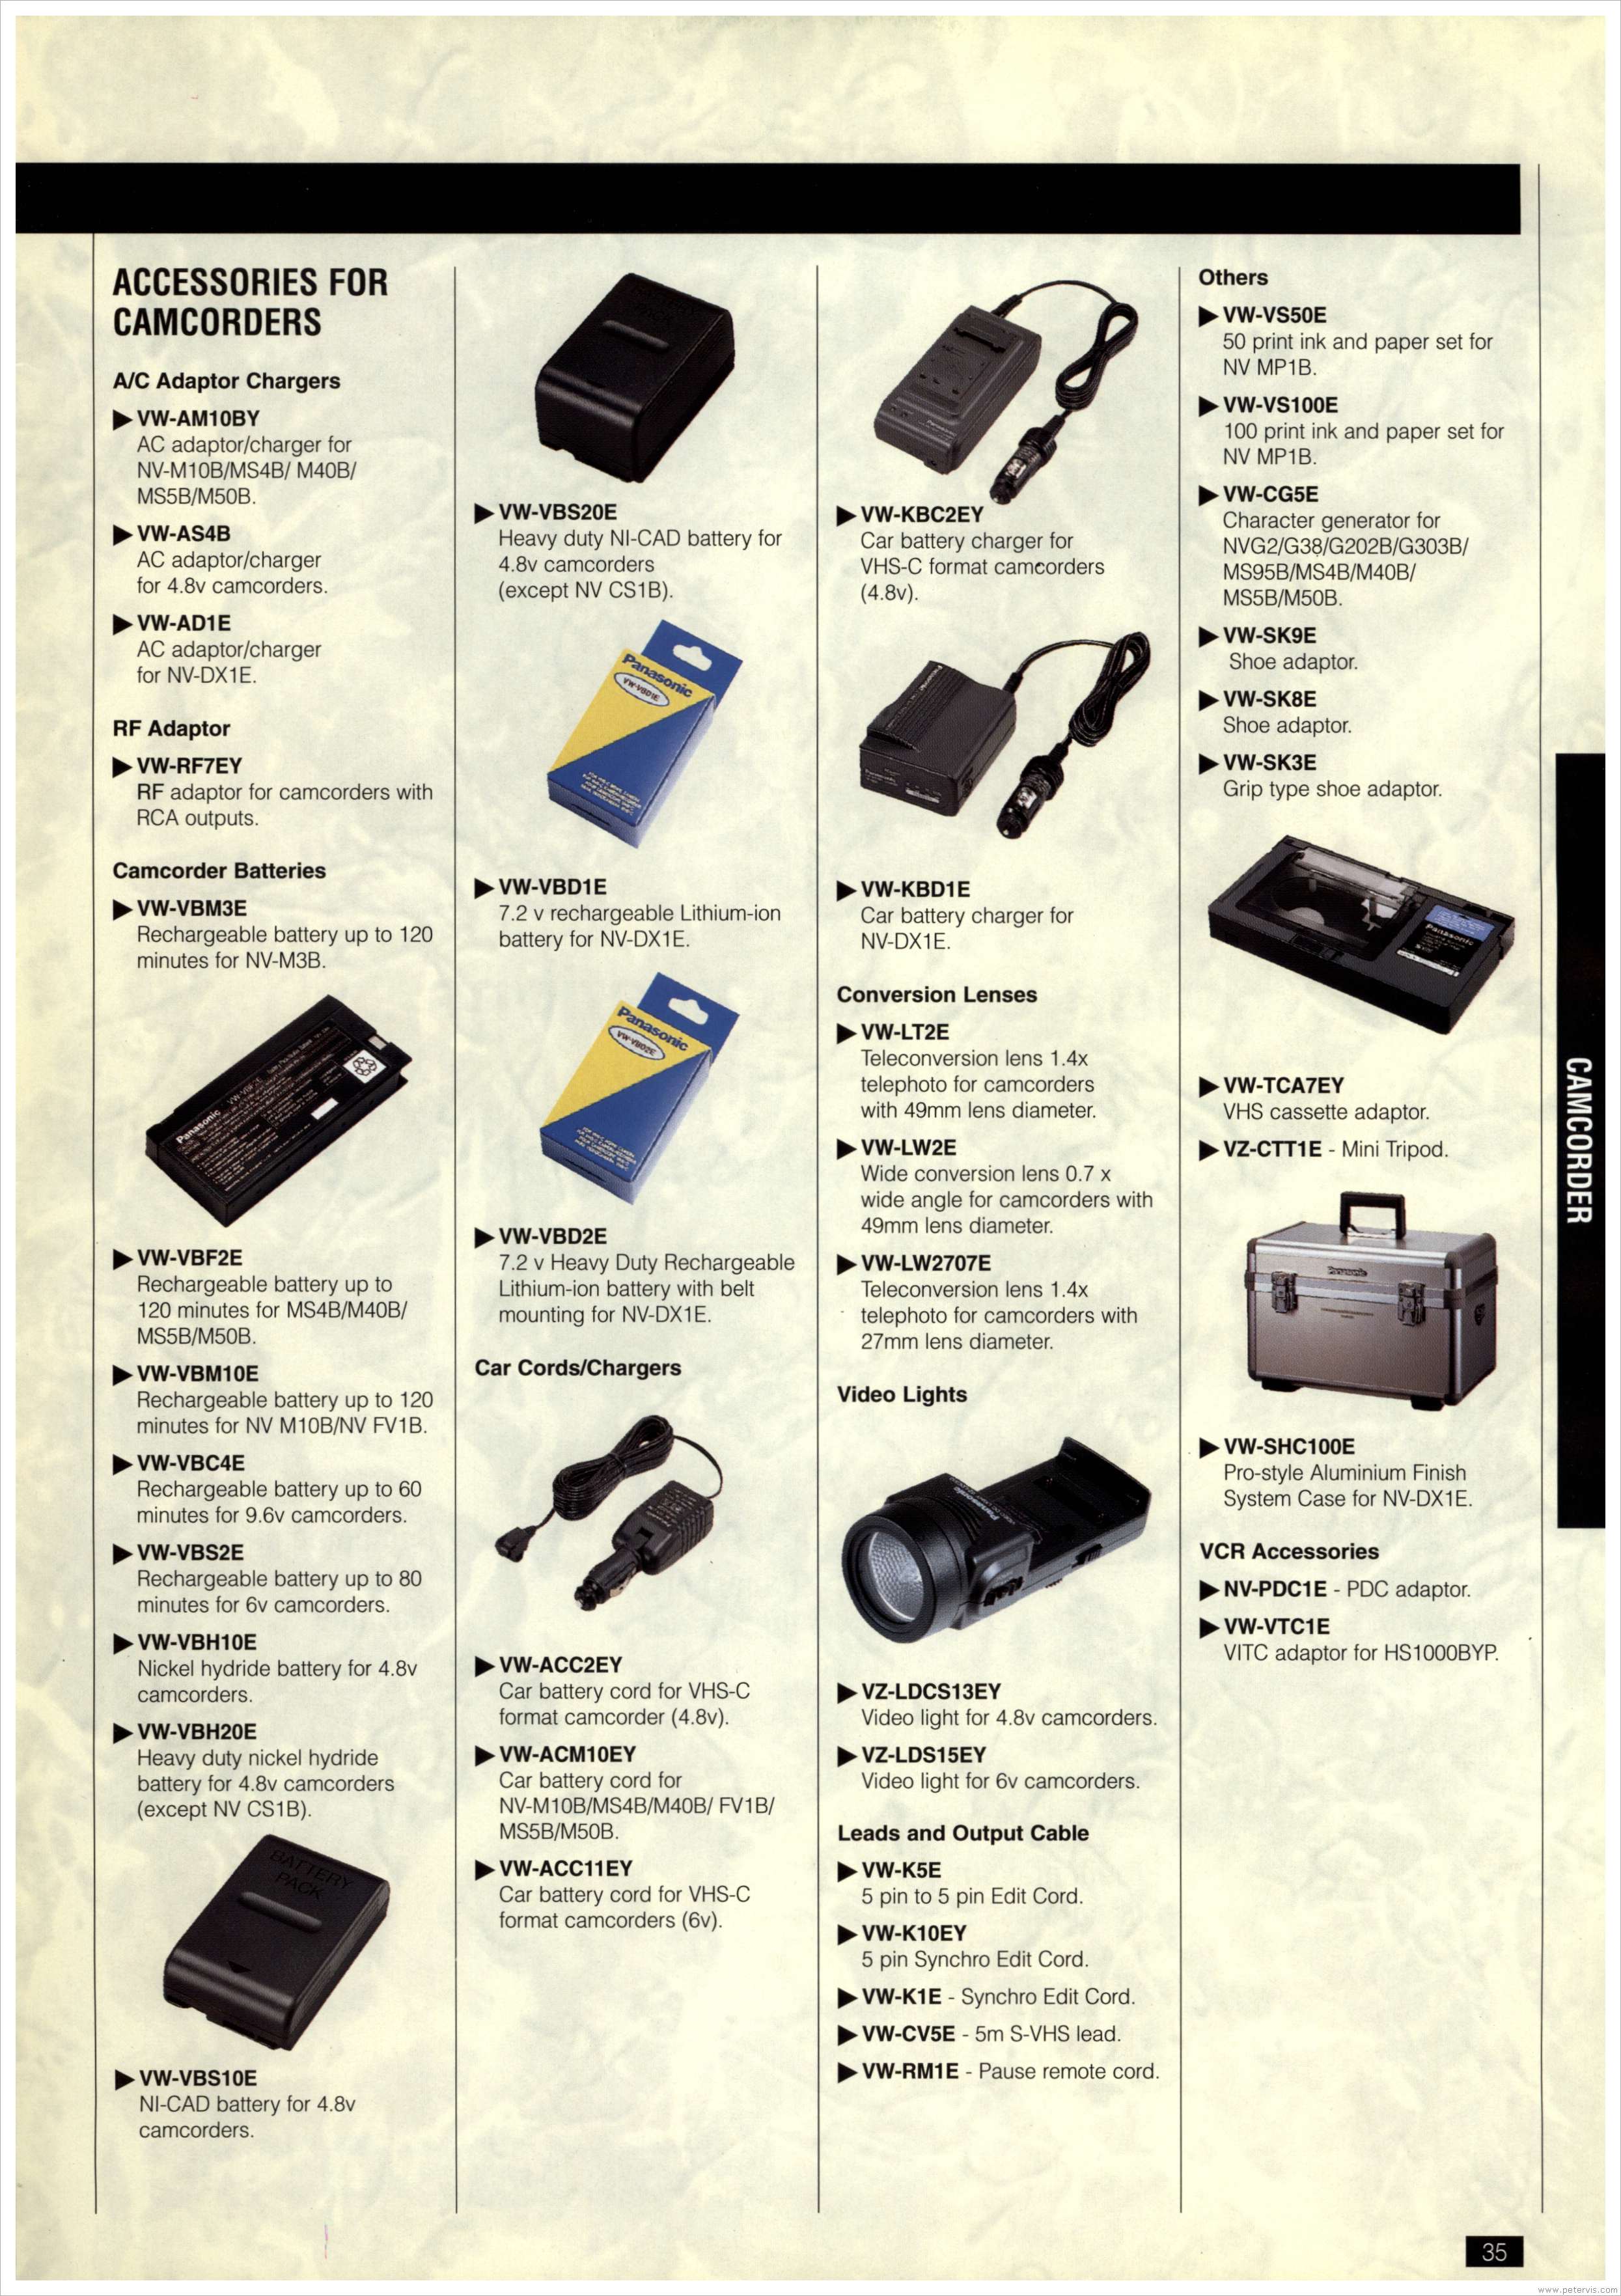 Accessories for Camcorders